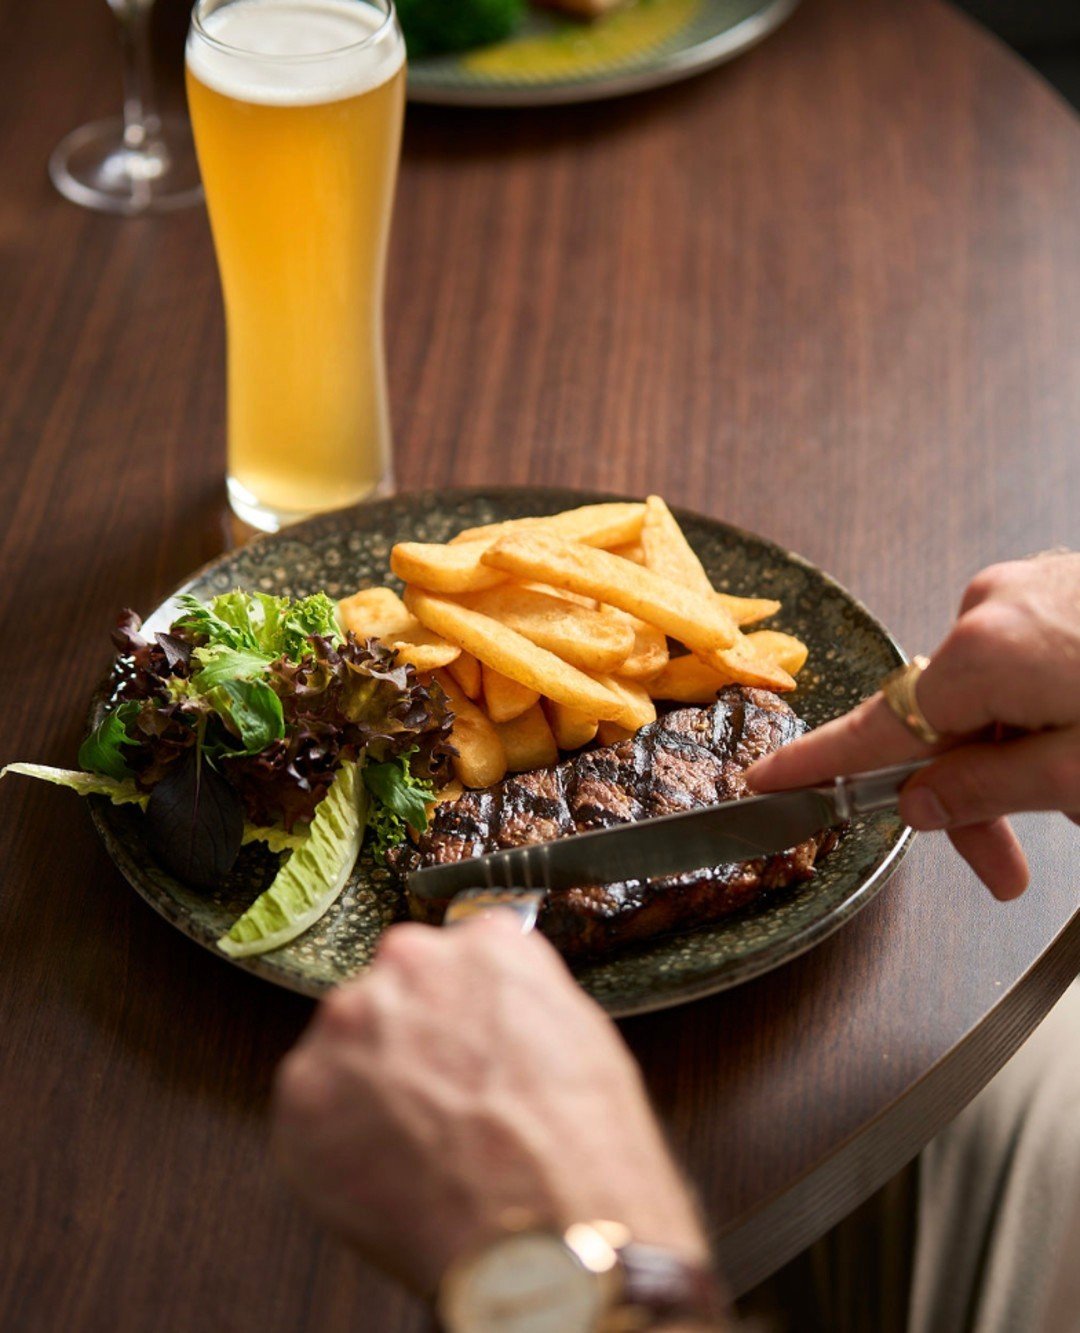 Transform your Tuesdays into an irresistible affair with our Steak Night Special at @theorchardringwood! 🥩🤤🔥

Indulge in a Grilled Portland Sirloin (150gm) accompanied by fries and a garden salad. Take your pick from our selection of sauces: red w